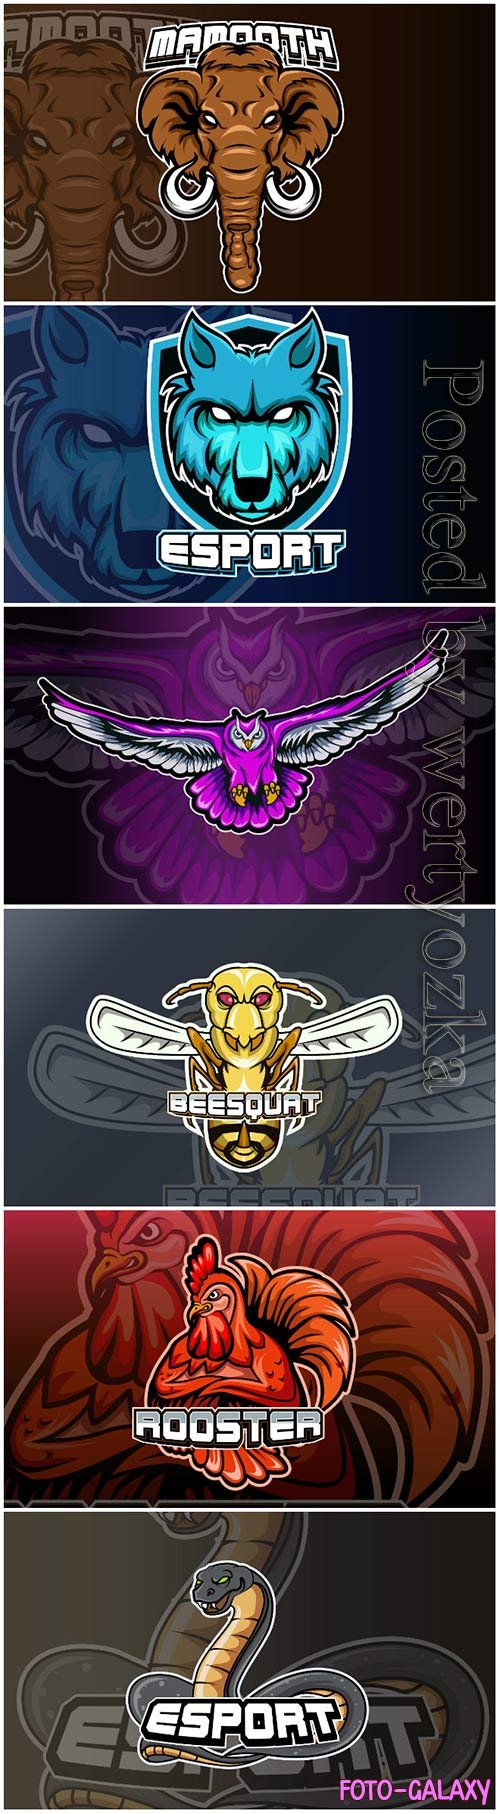 Mascot for sports and esports logo isolated premium vector vol 3